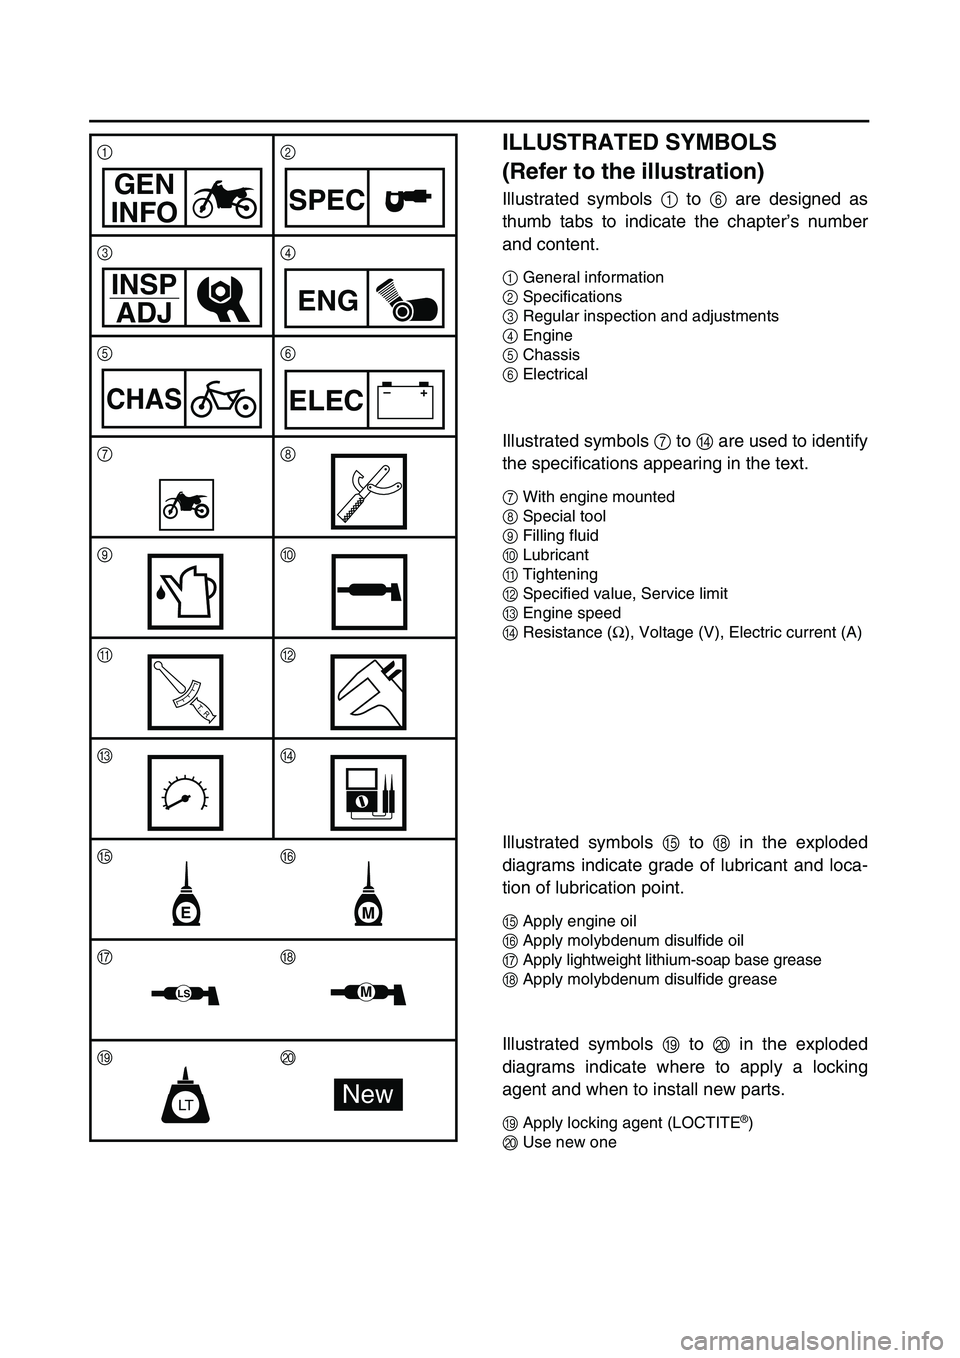 YAMAHA TTR125 2006  Owners Manual  
ILLUSTRATED SYMBOLS 
(Refer to the illustration) 
Illustrated symbols  
1  
 to   
6  
 are designed as
thumb tabs to indicate the chapter’s number
and content. 
1 
General information 
2 
Specifi